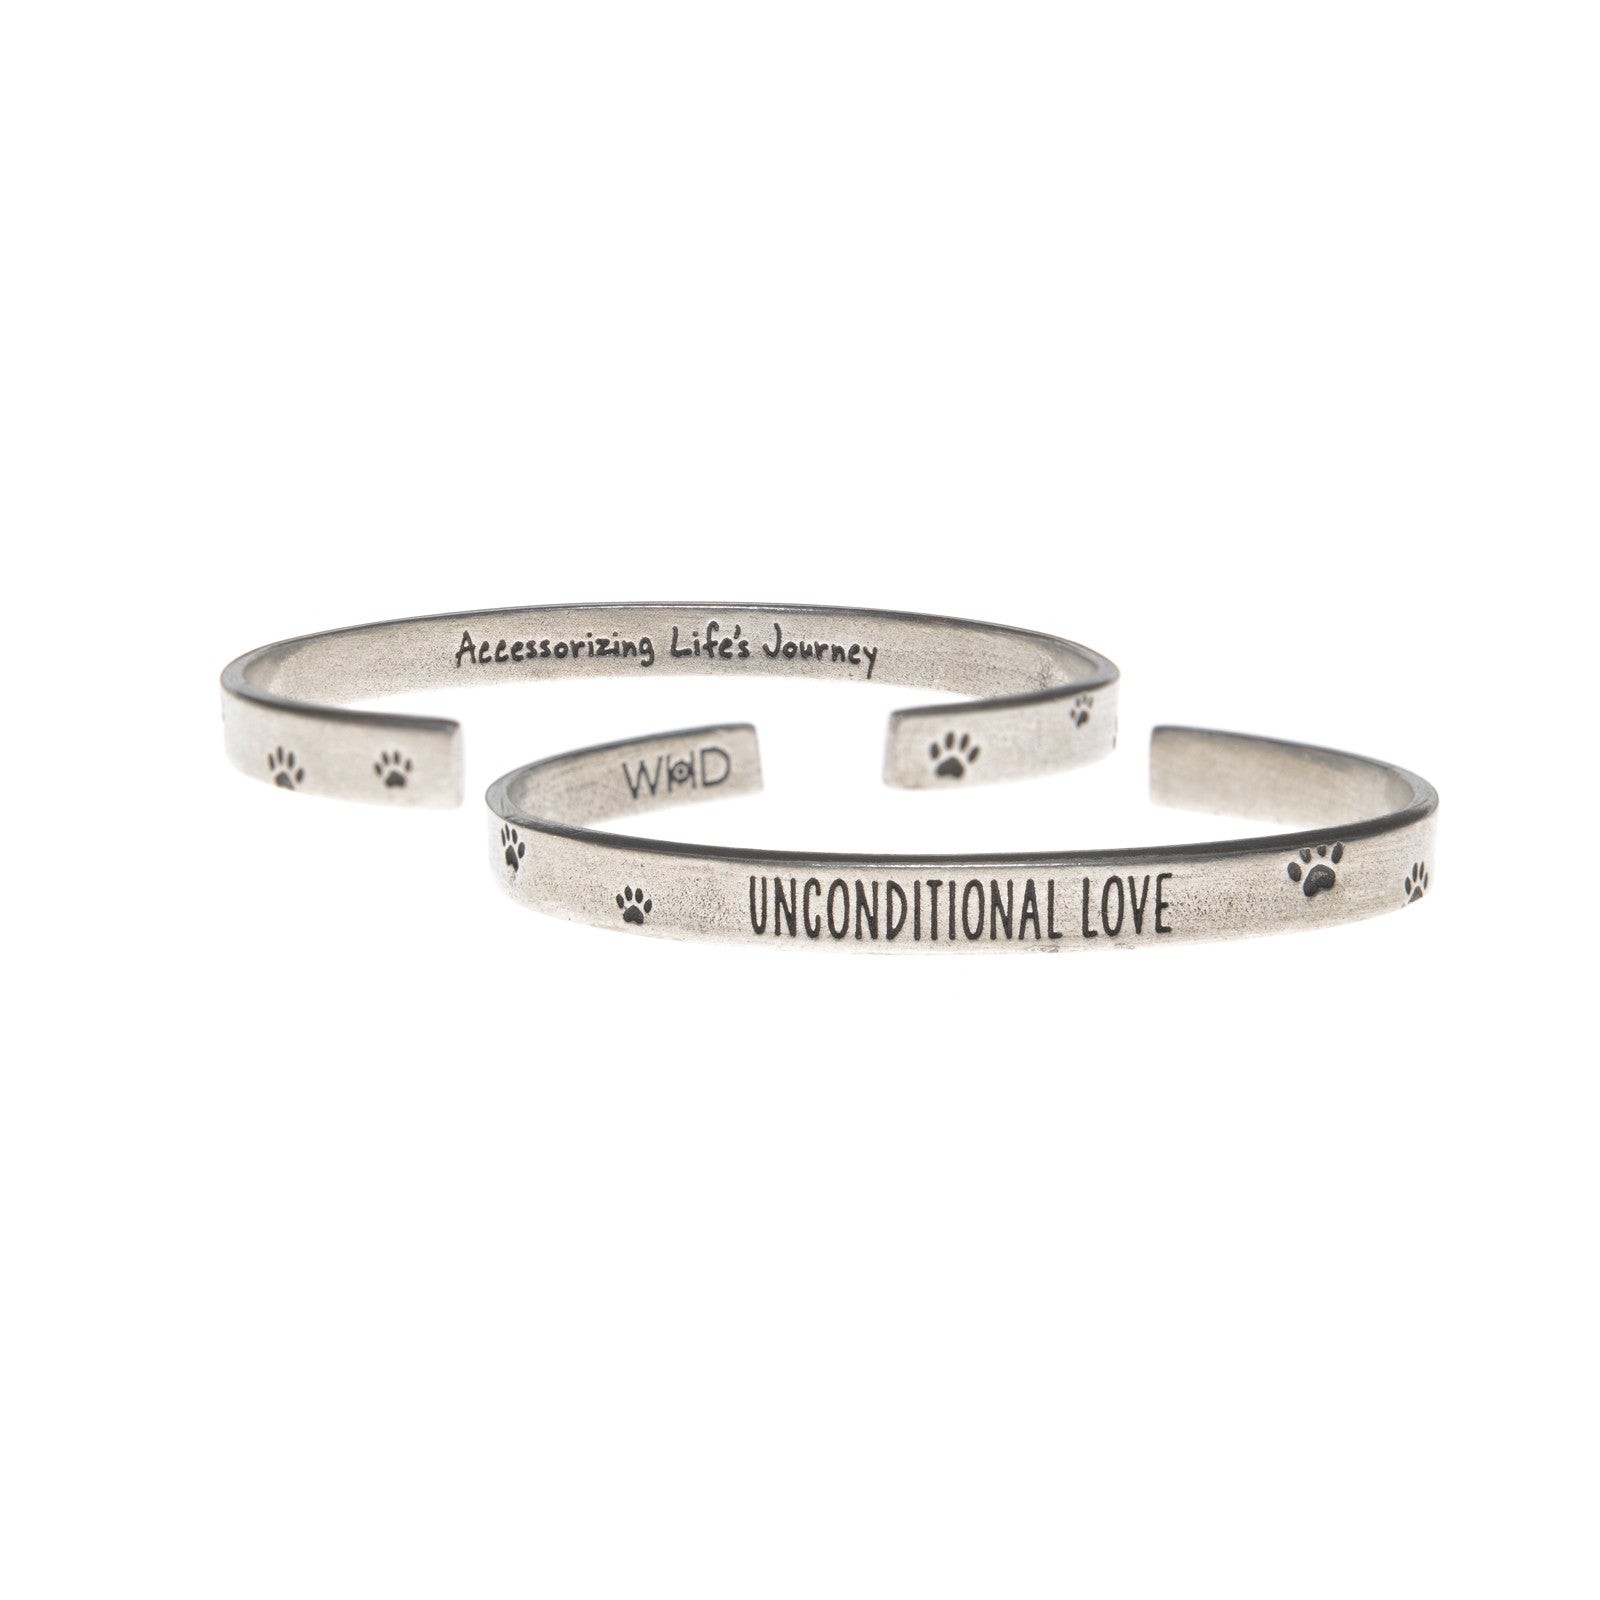 Unconditional Love Cuff Inspirational Jewelry Bracelet - Pet Sympathy Gift or Memorial by Quotable Cuffs - Whitney Howard Designs